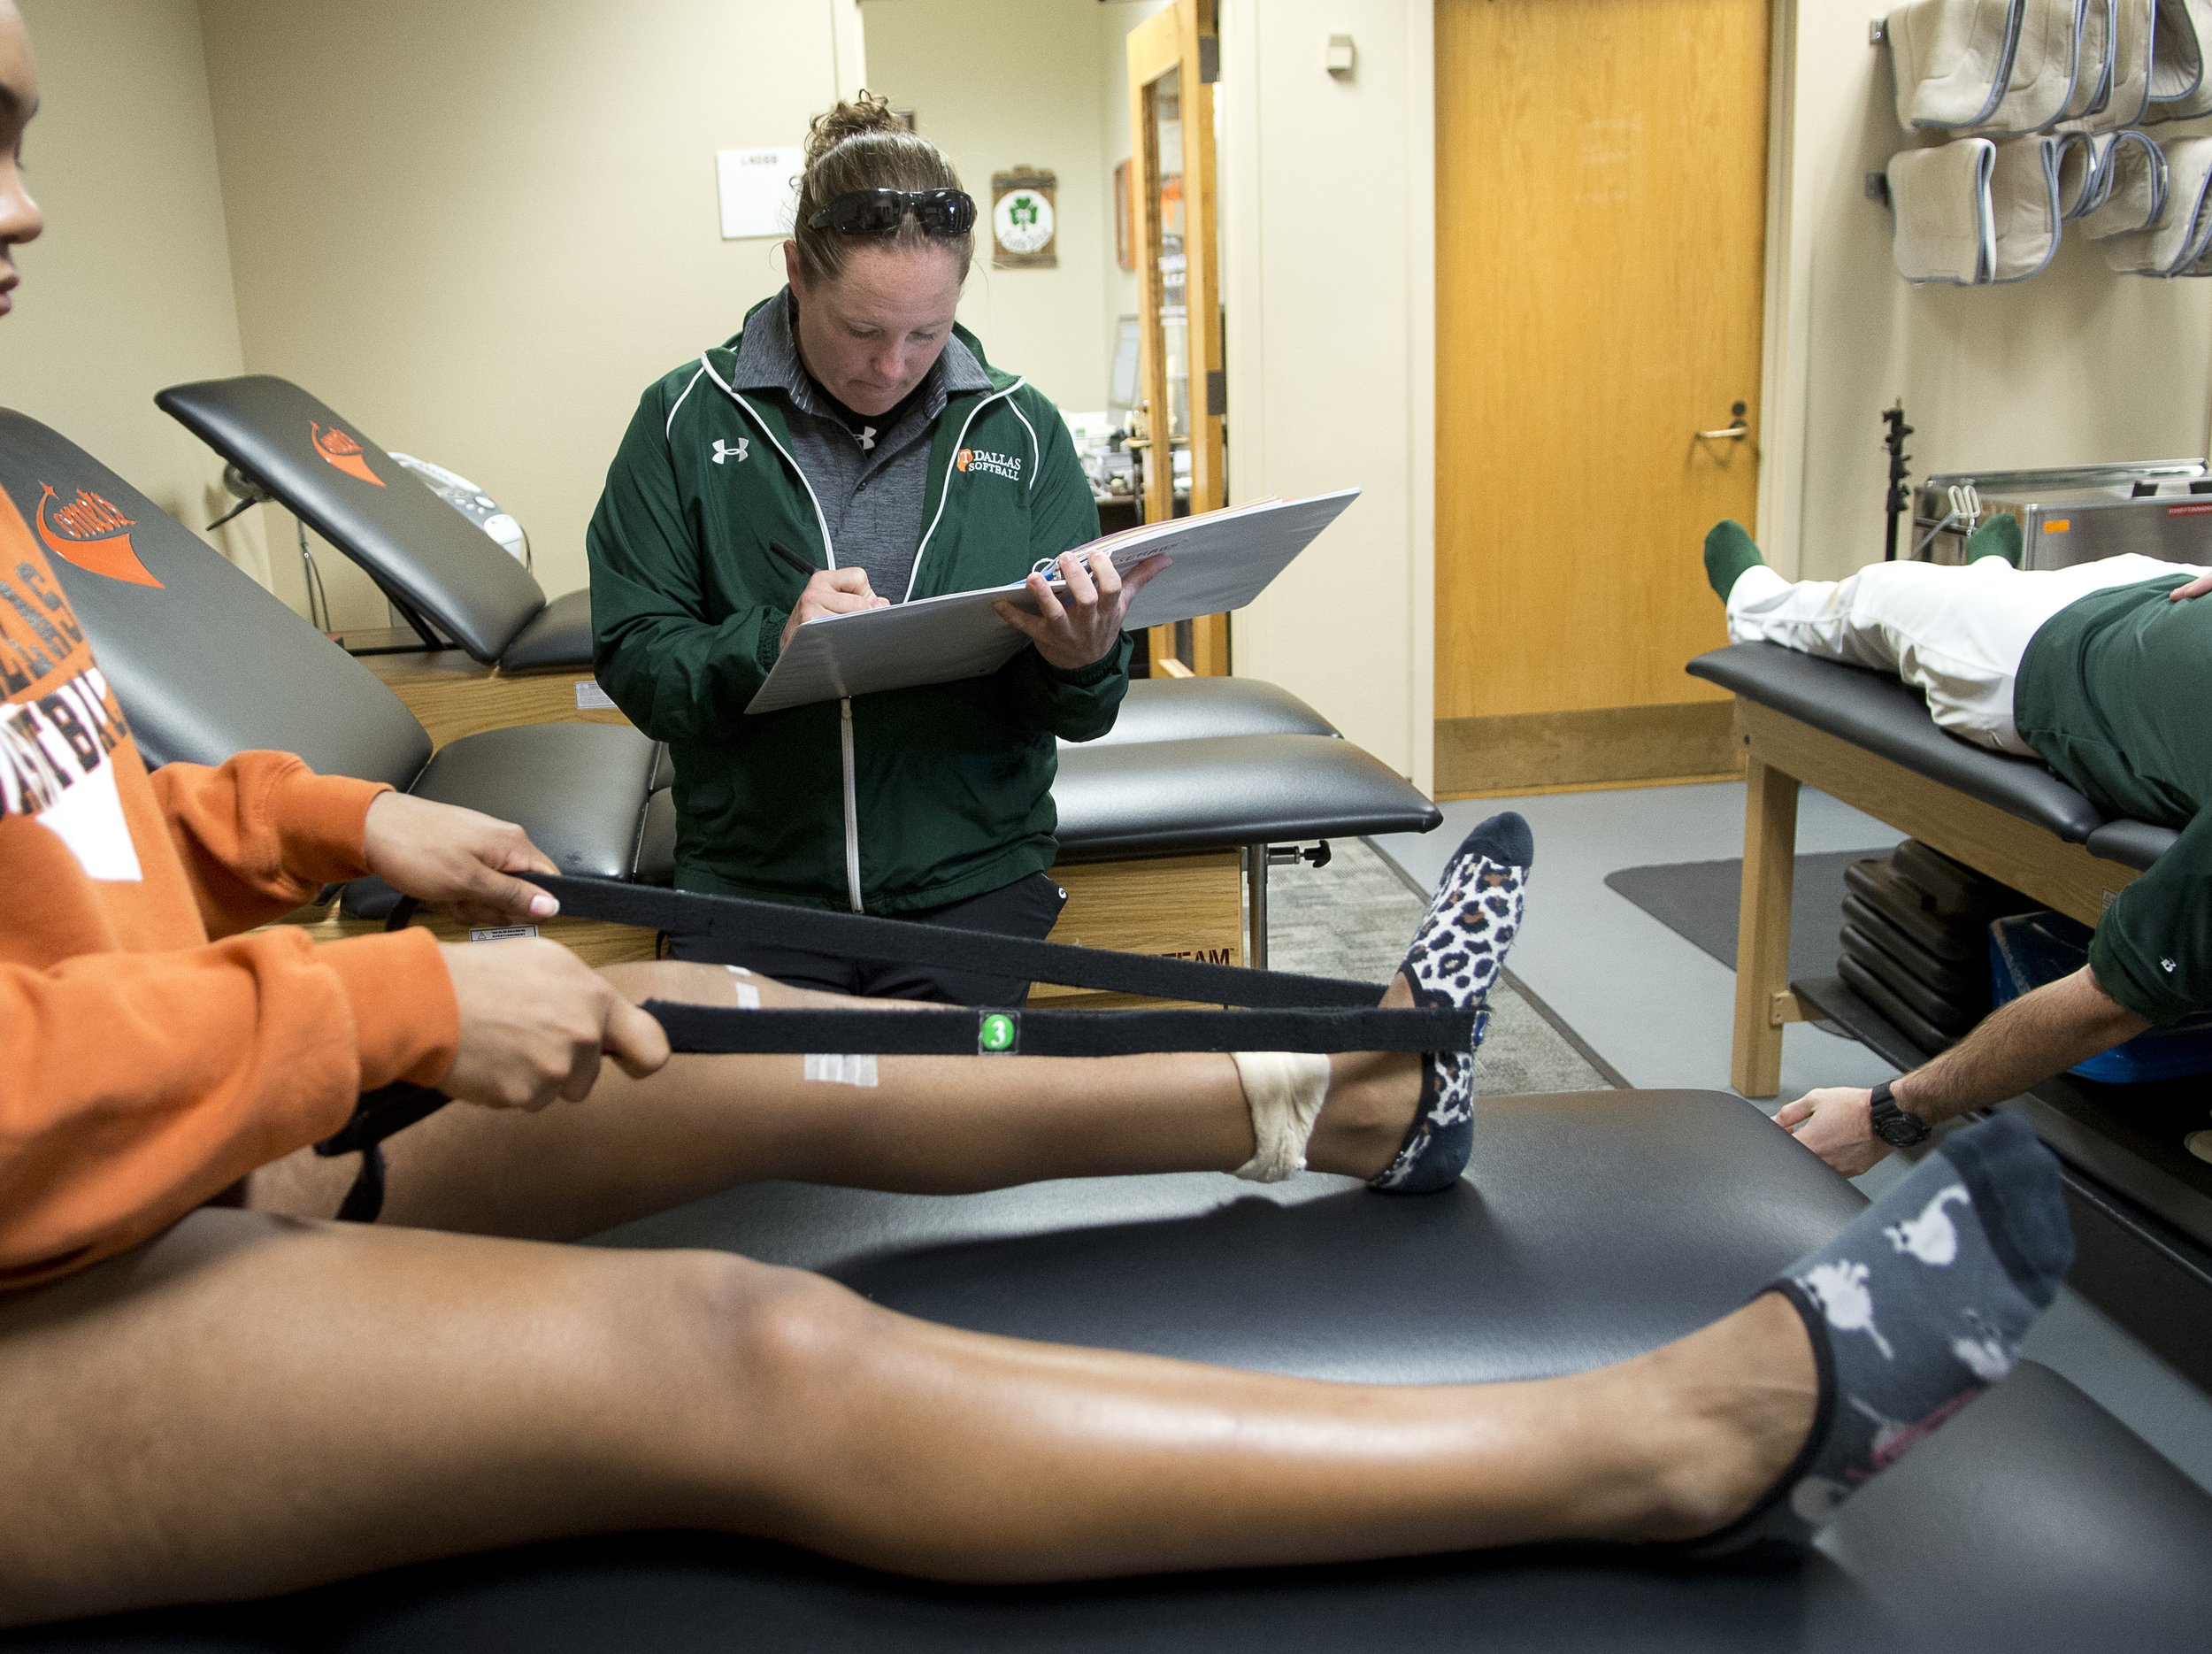 What is an Athletic Trainer? — California Athletic Trainers' Association